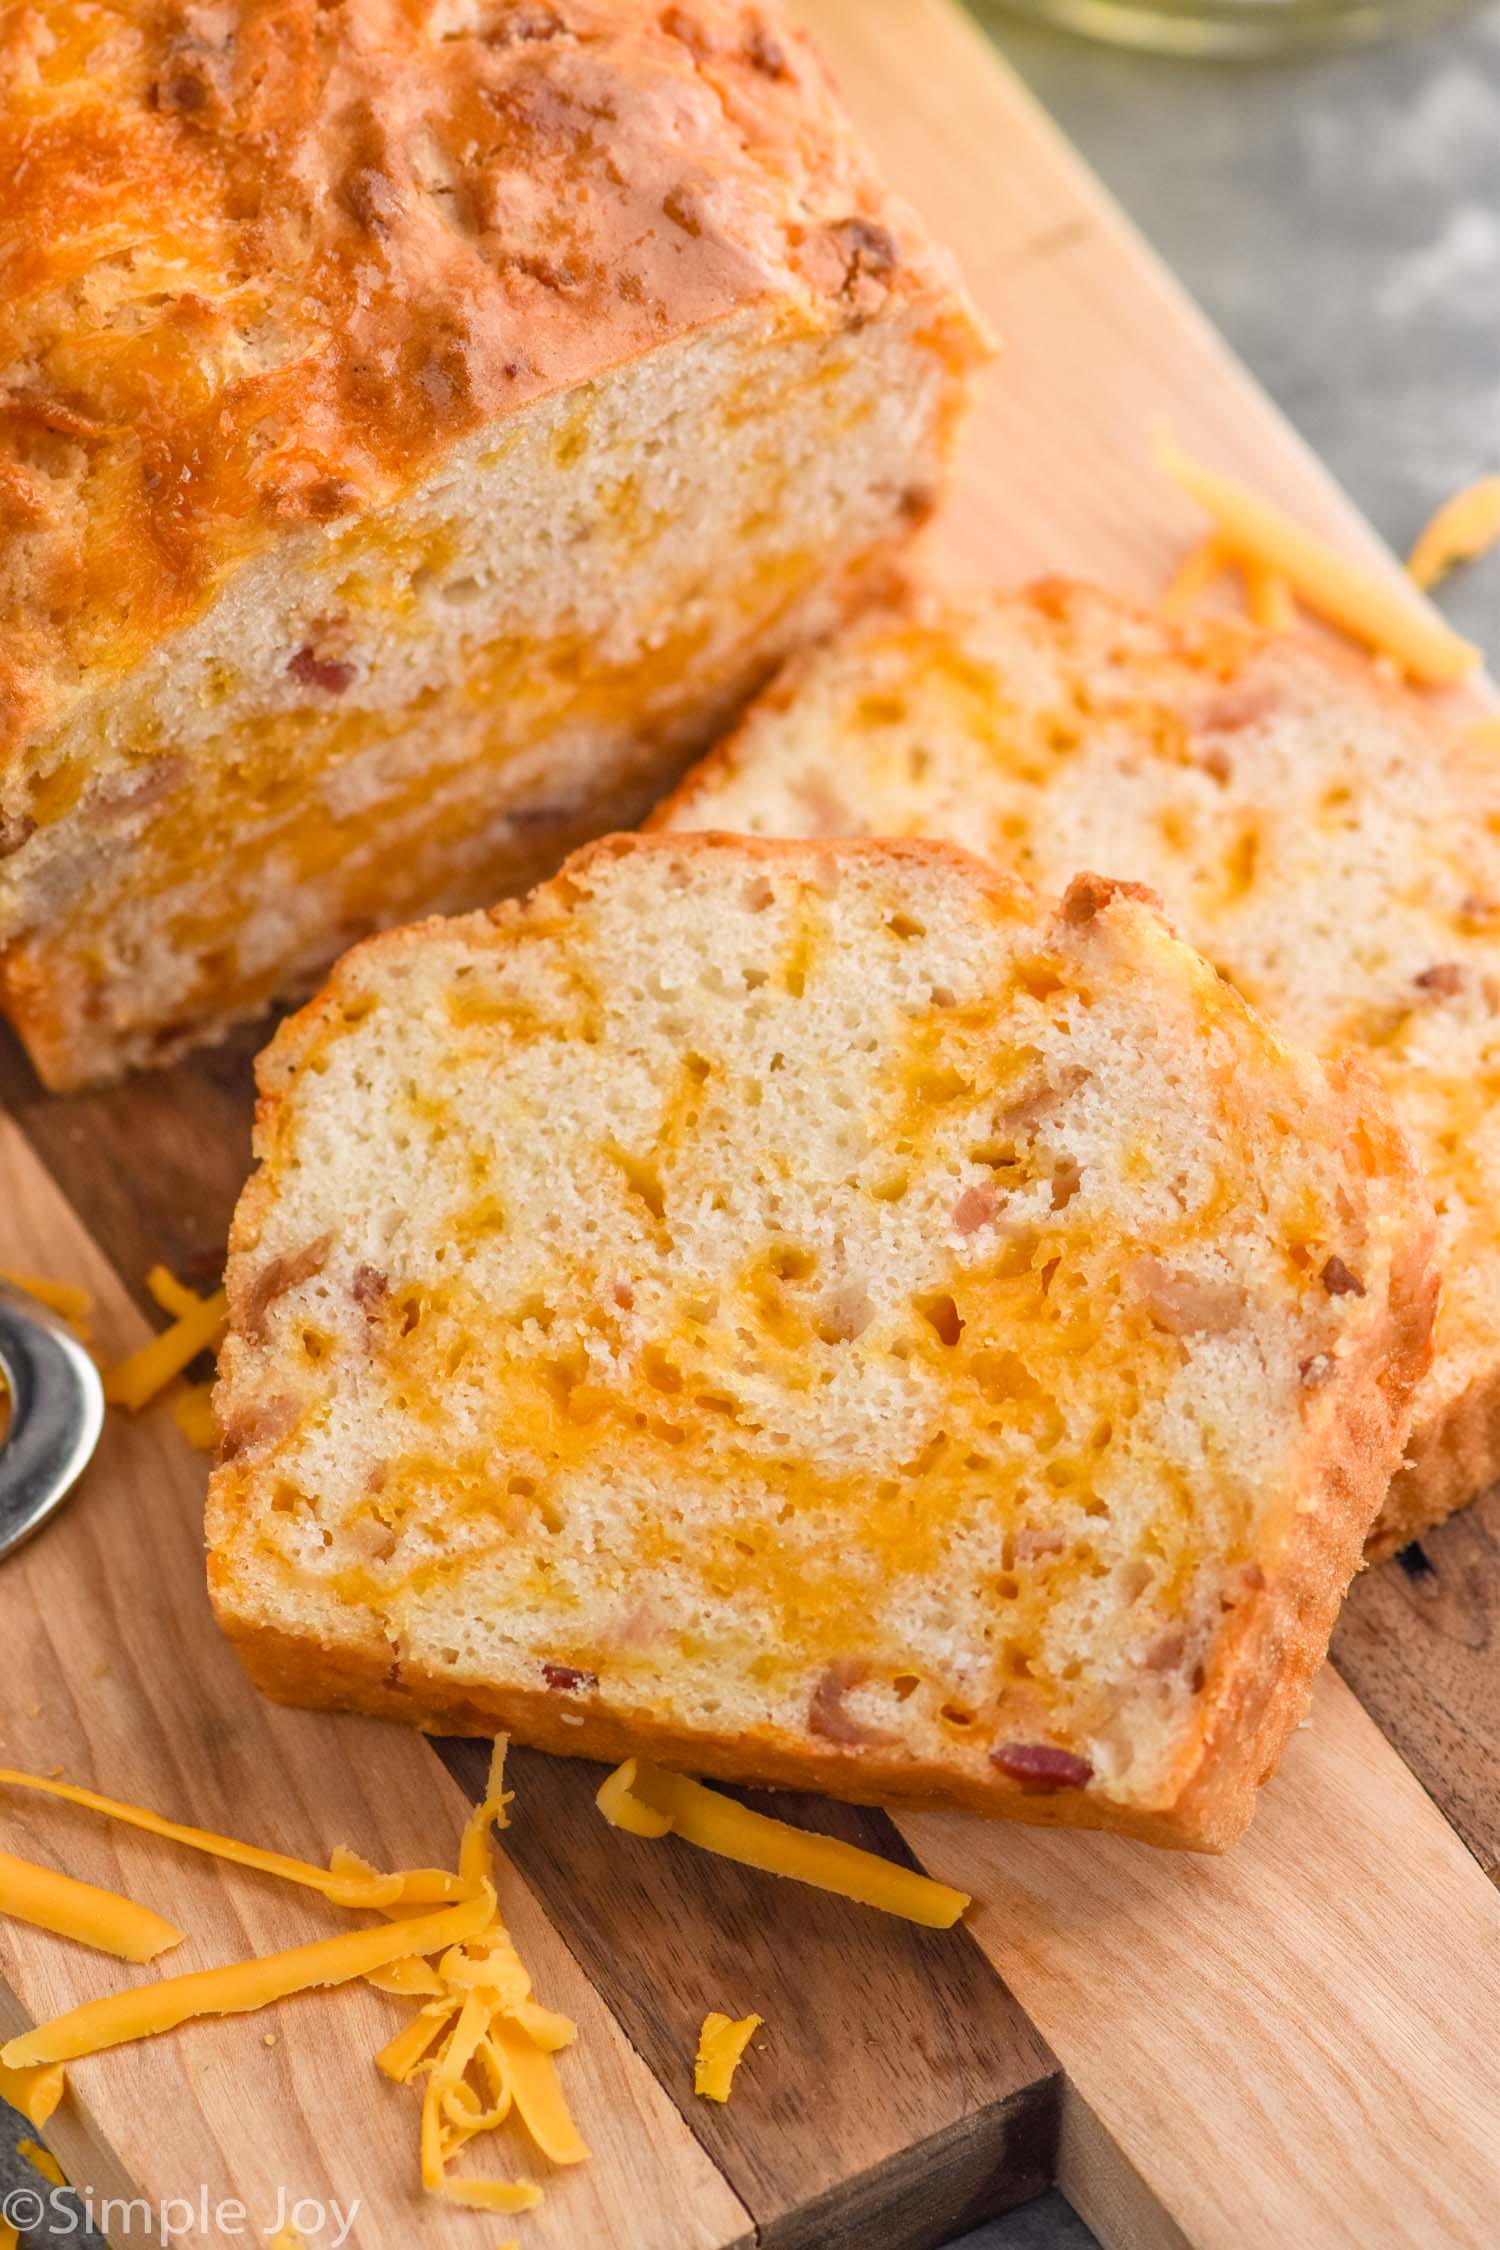 Photo of slices of Bacon Cheese Beer Bread next to the loaf on a wooden cutting board